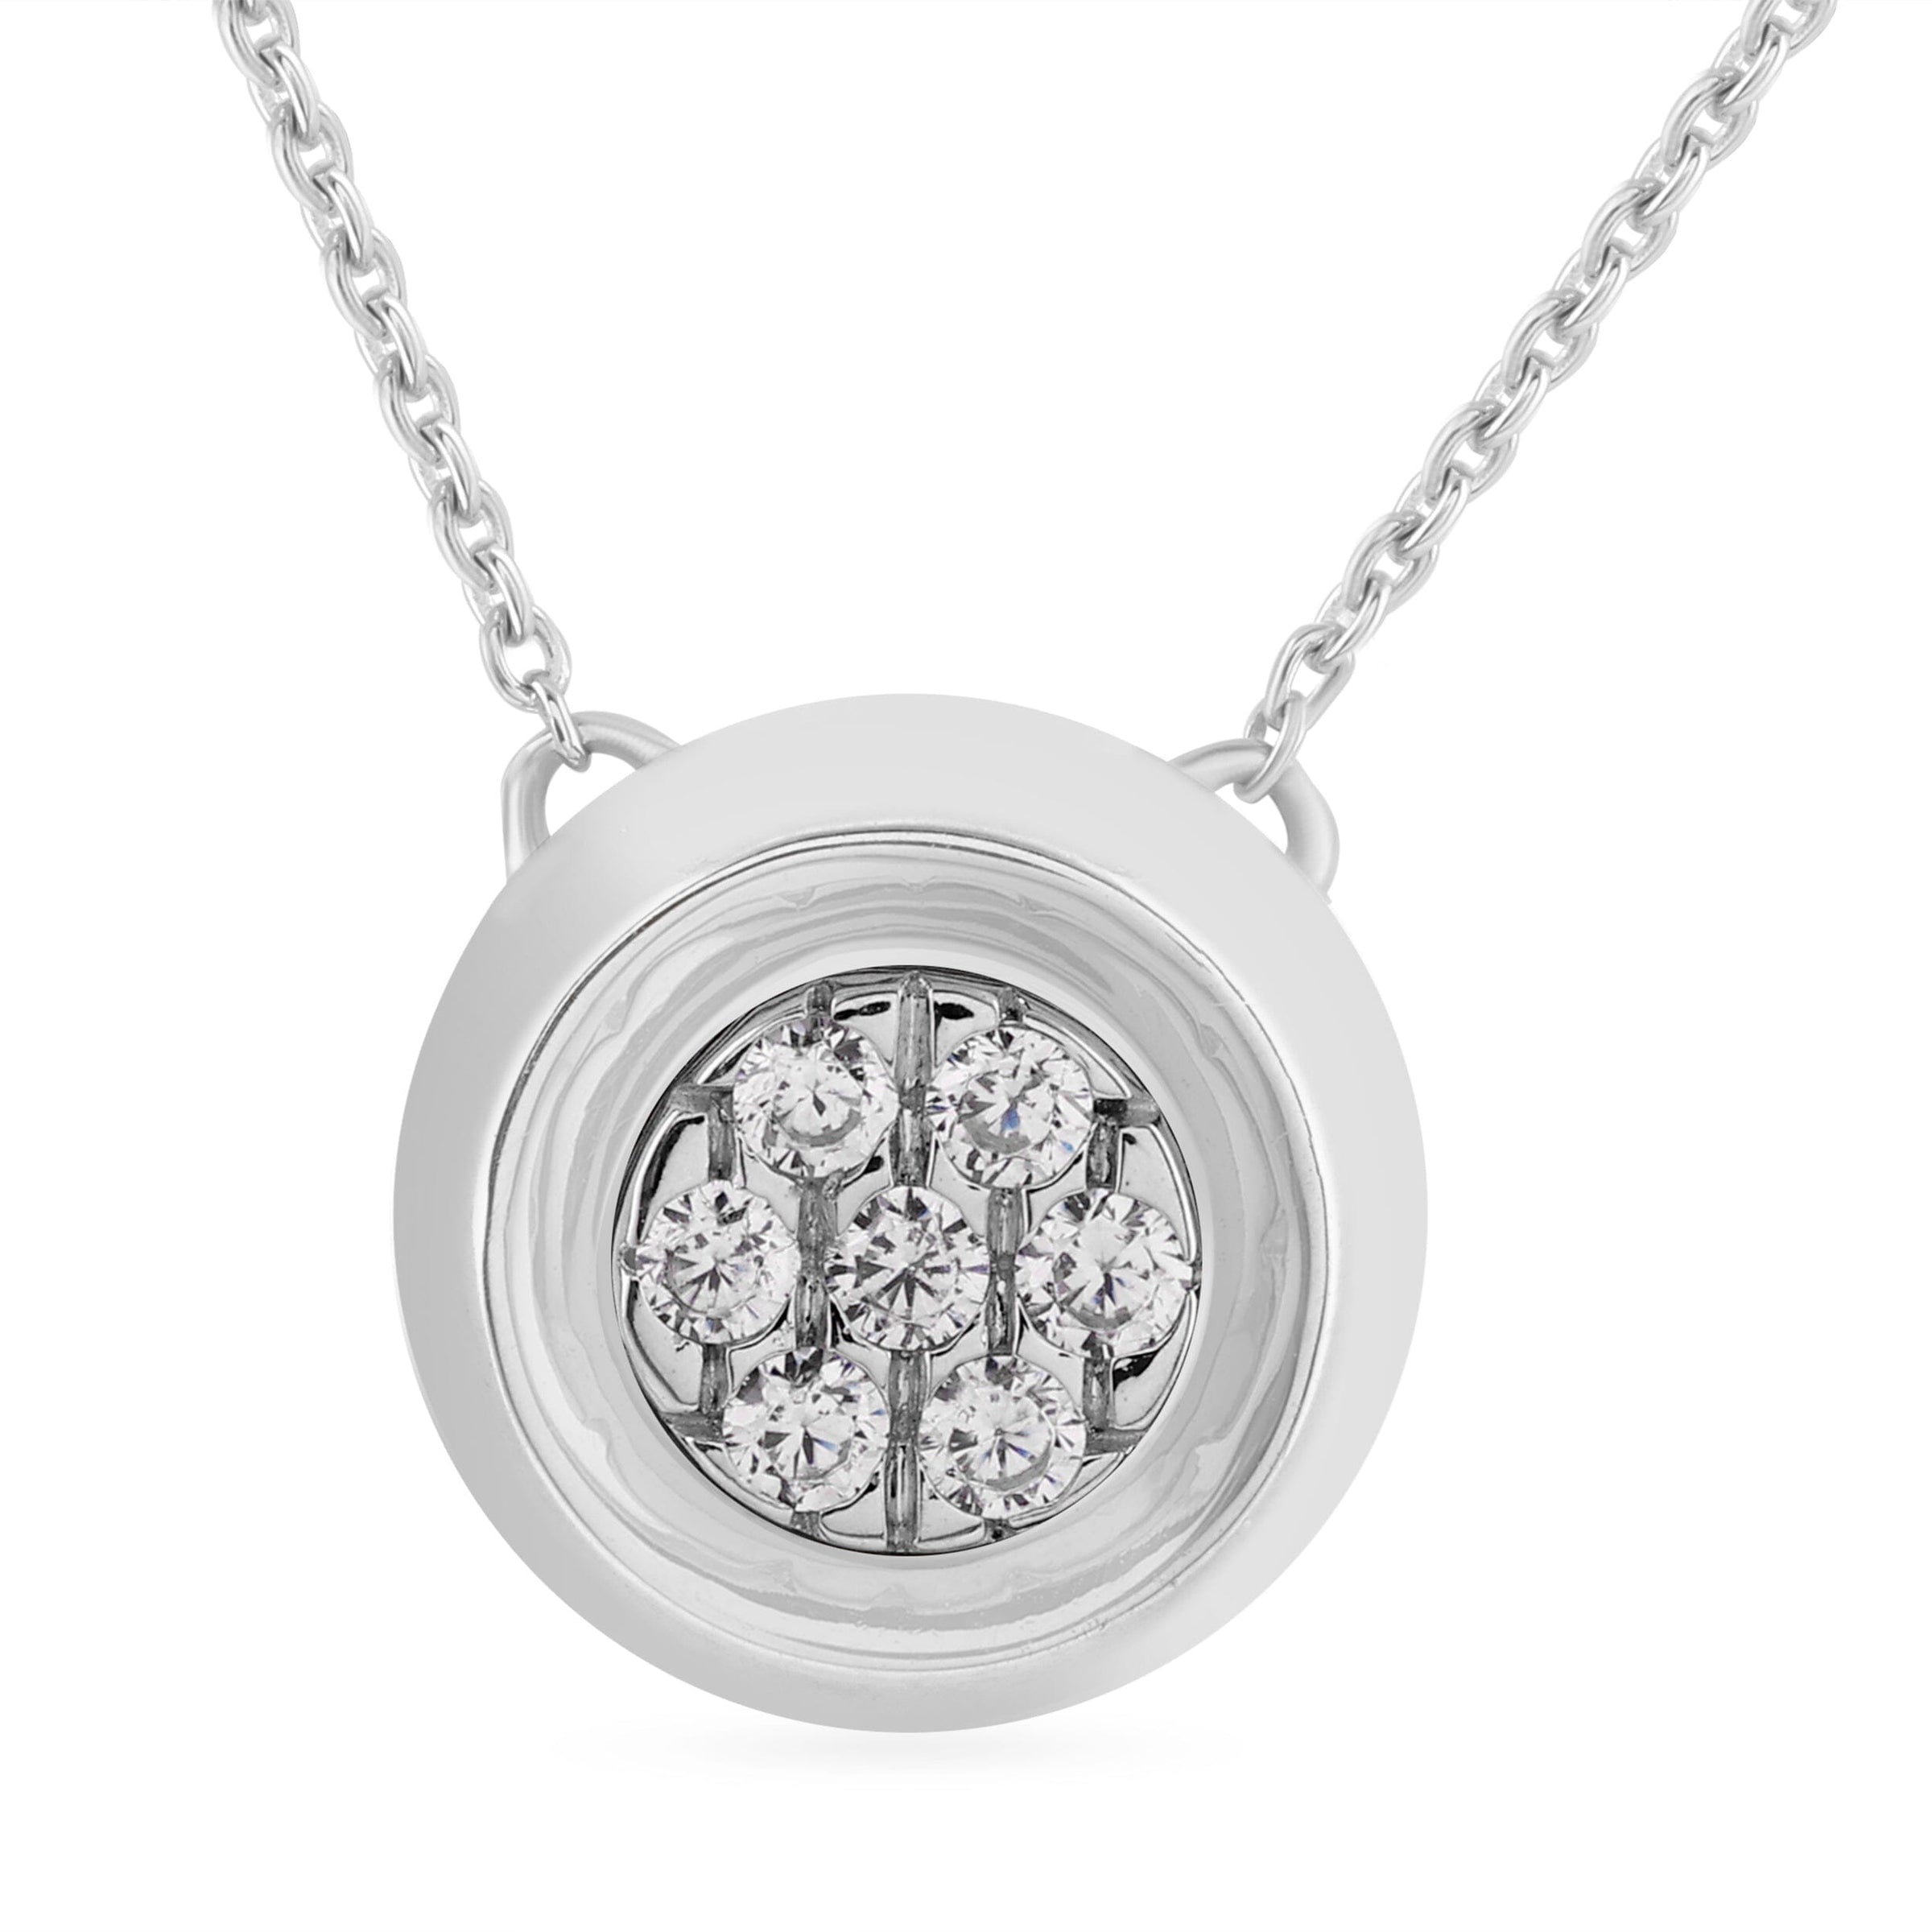 Bezel Set Slider Necklace with 0.10ct of Diamonds in Sterling Silver Necklaces Bevilles 